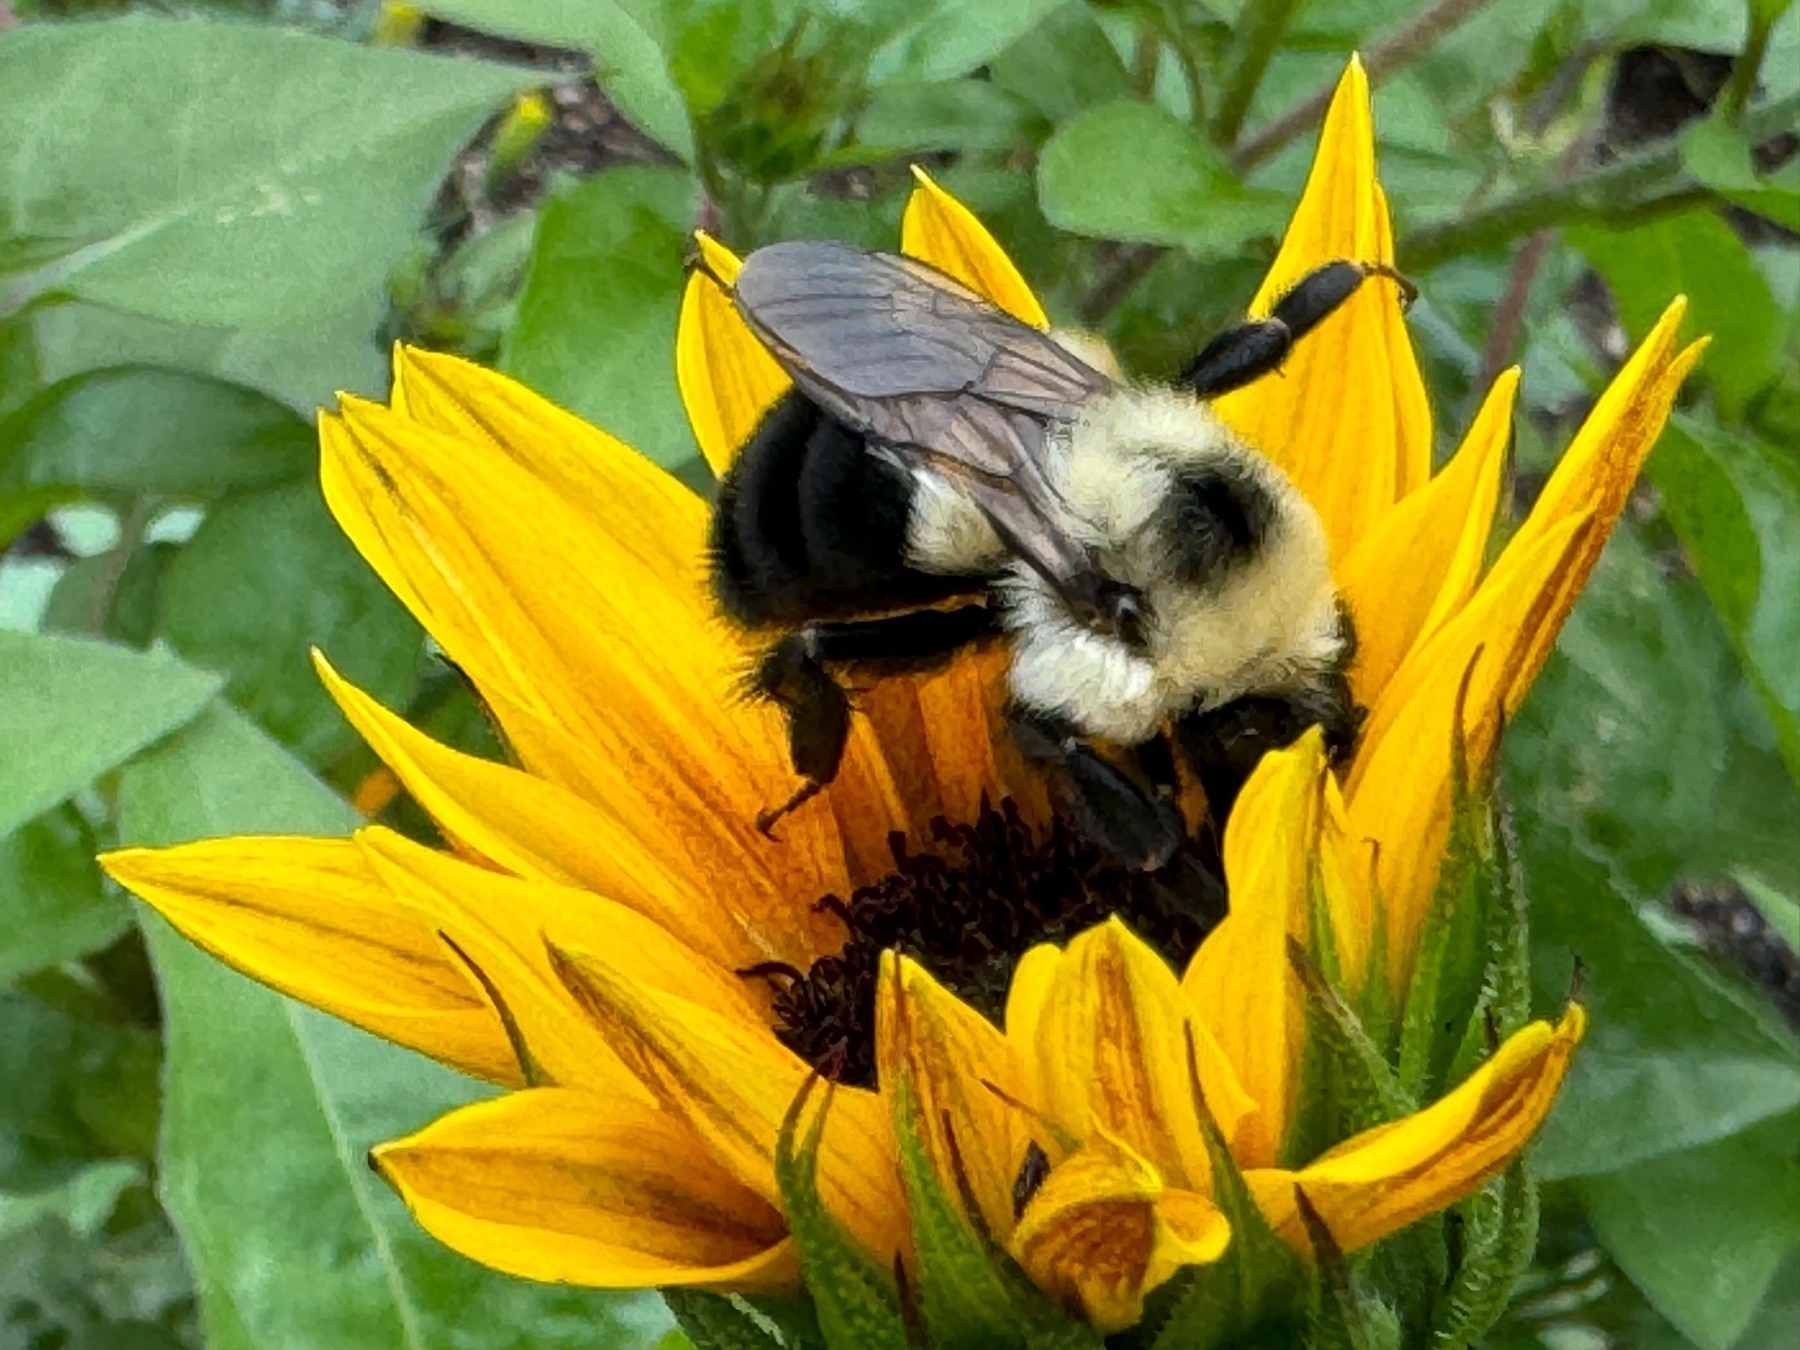 A bumblebee is perched on a vibrant yellow sunflower, surrounded by green foliage.